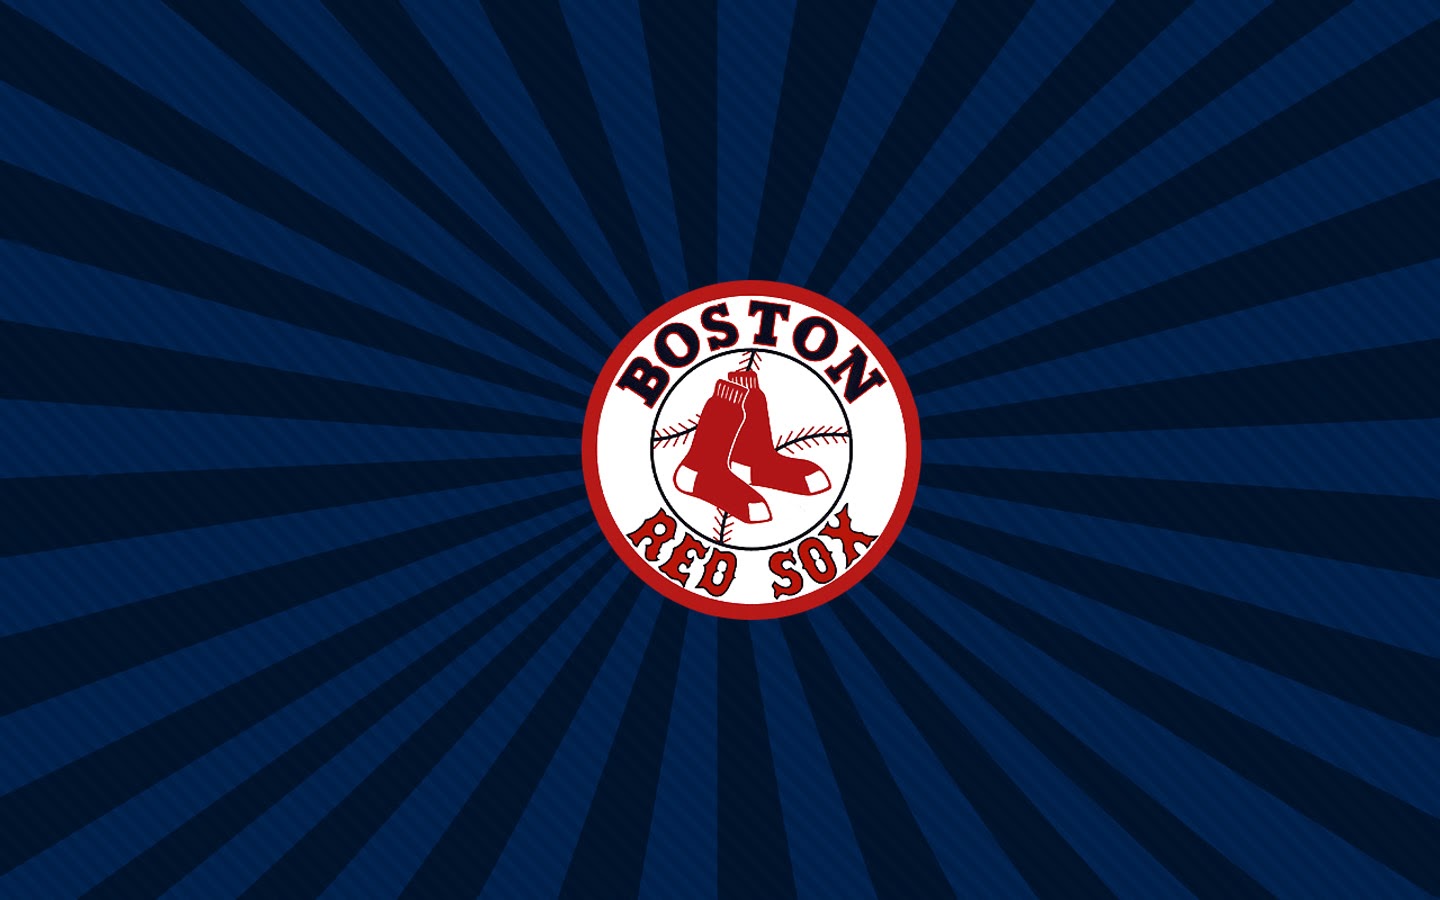 Free Download Red Sox Wallpaper Boston Red Sox Wallpaper Boston Red Sox Wallpaper [1440x900] For